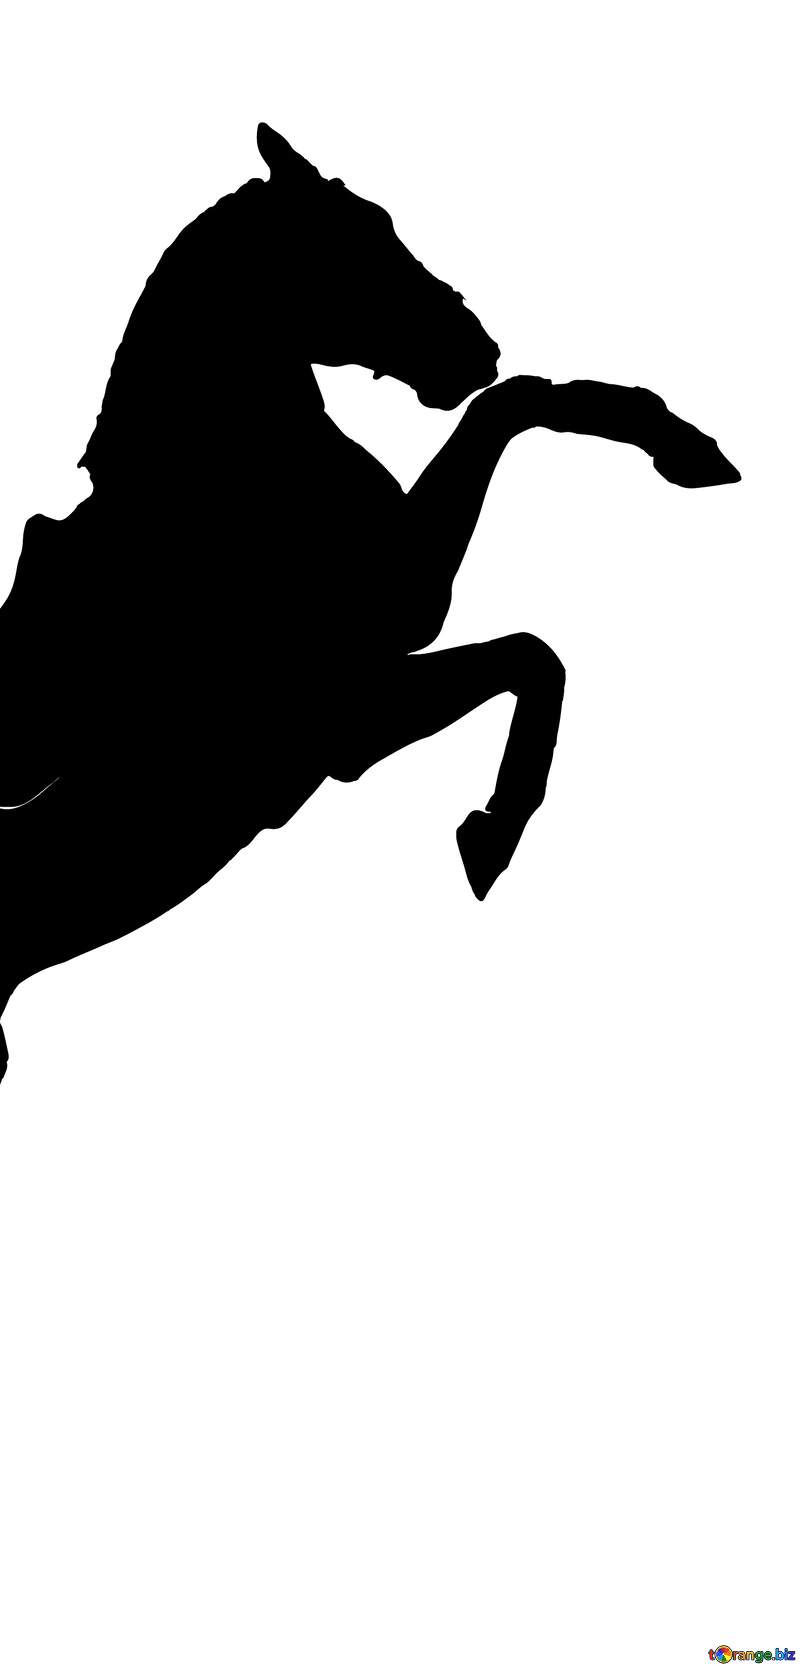 Image for profile picture Silhouette of a horse. №46154